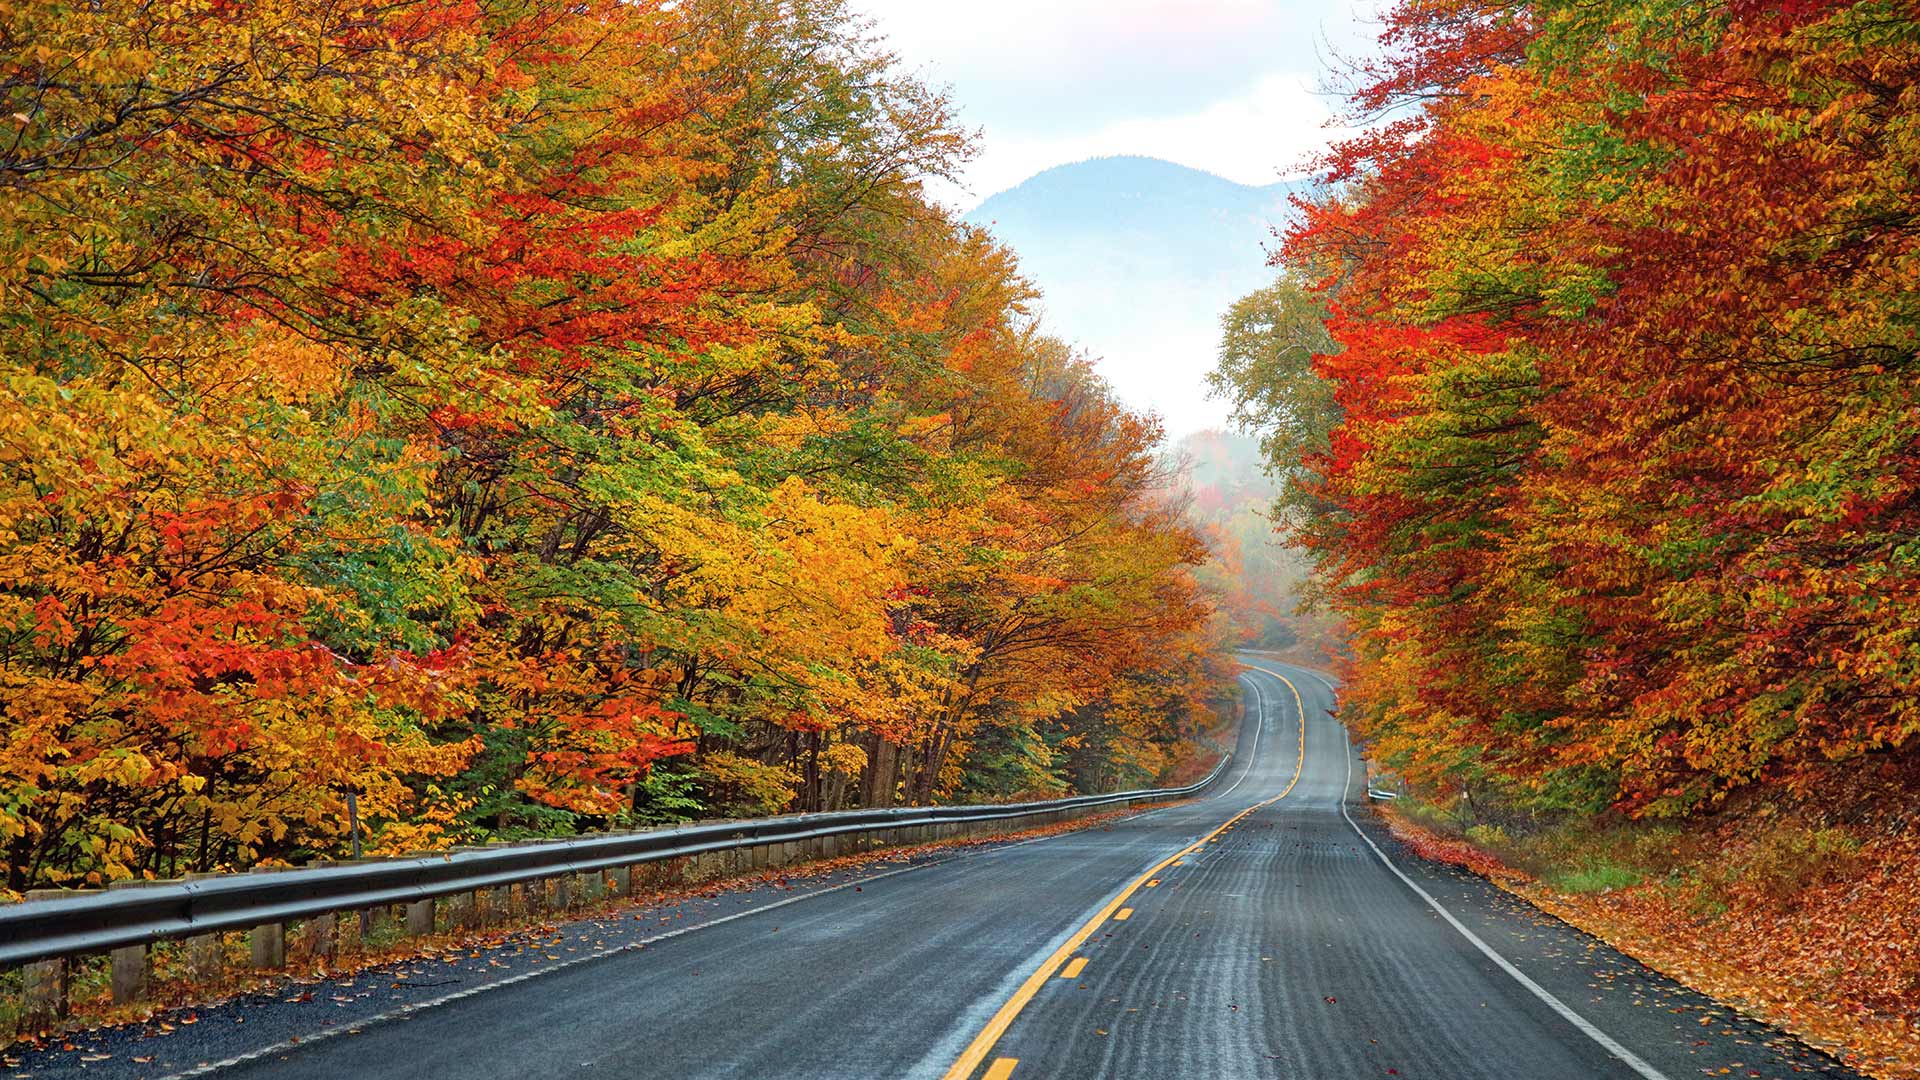 Kancamagus Highway during the Fall